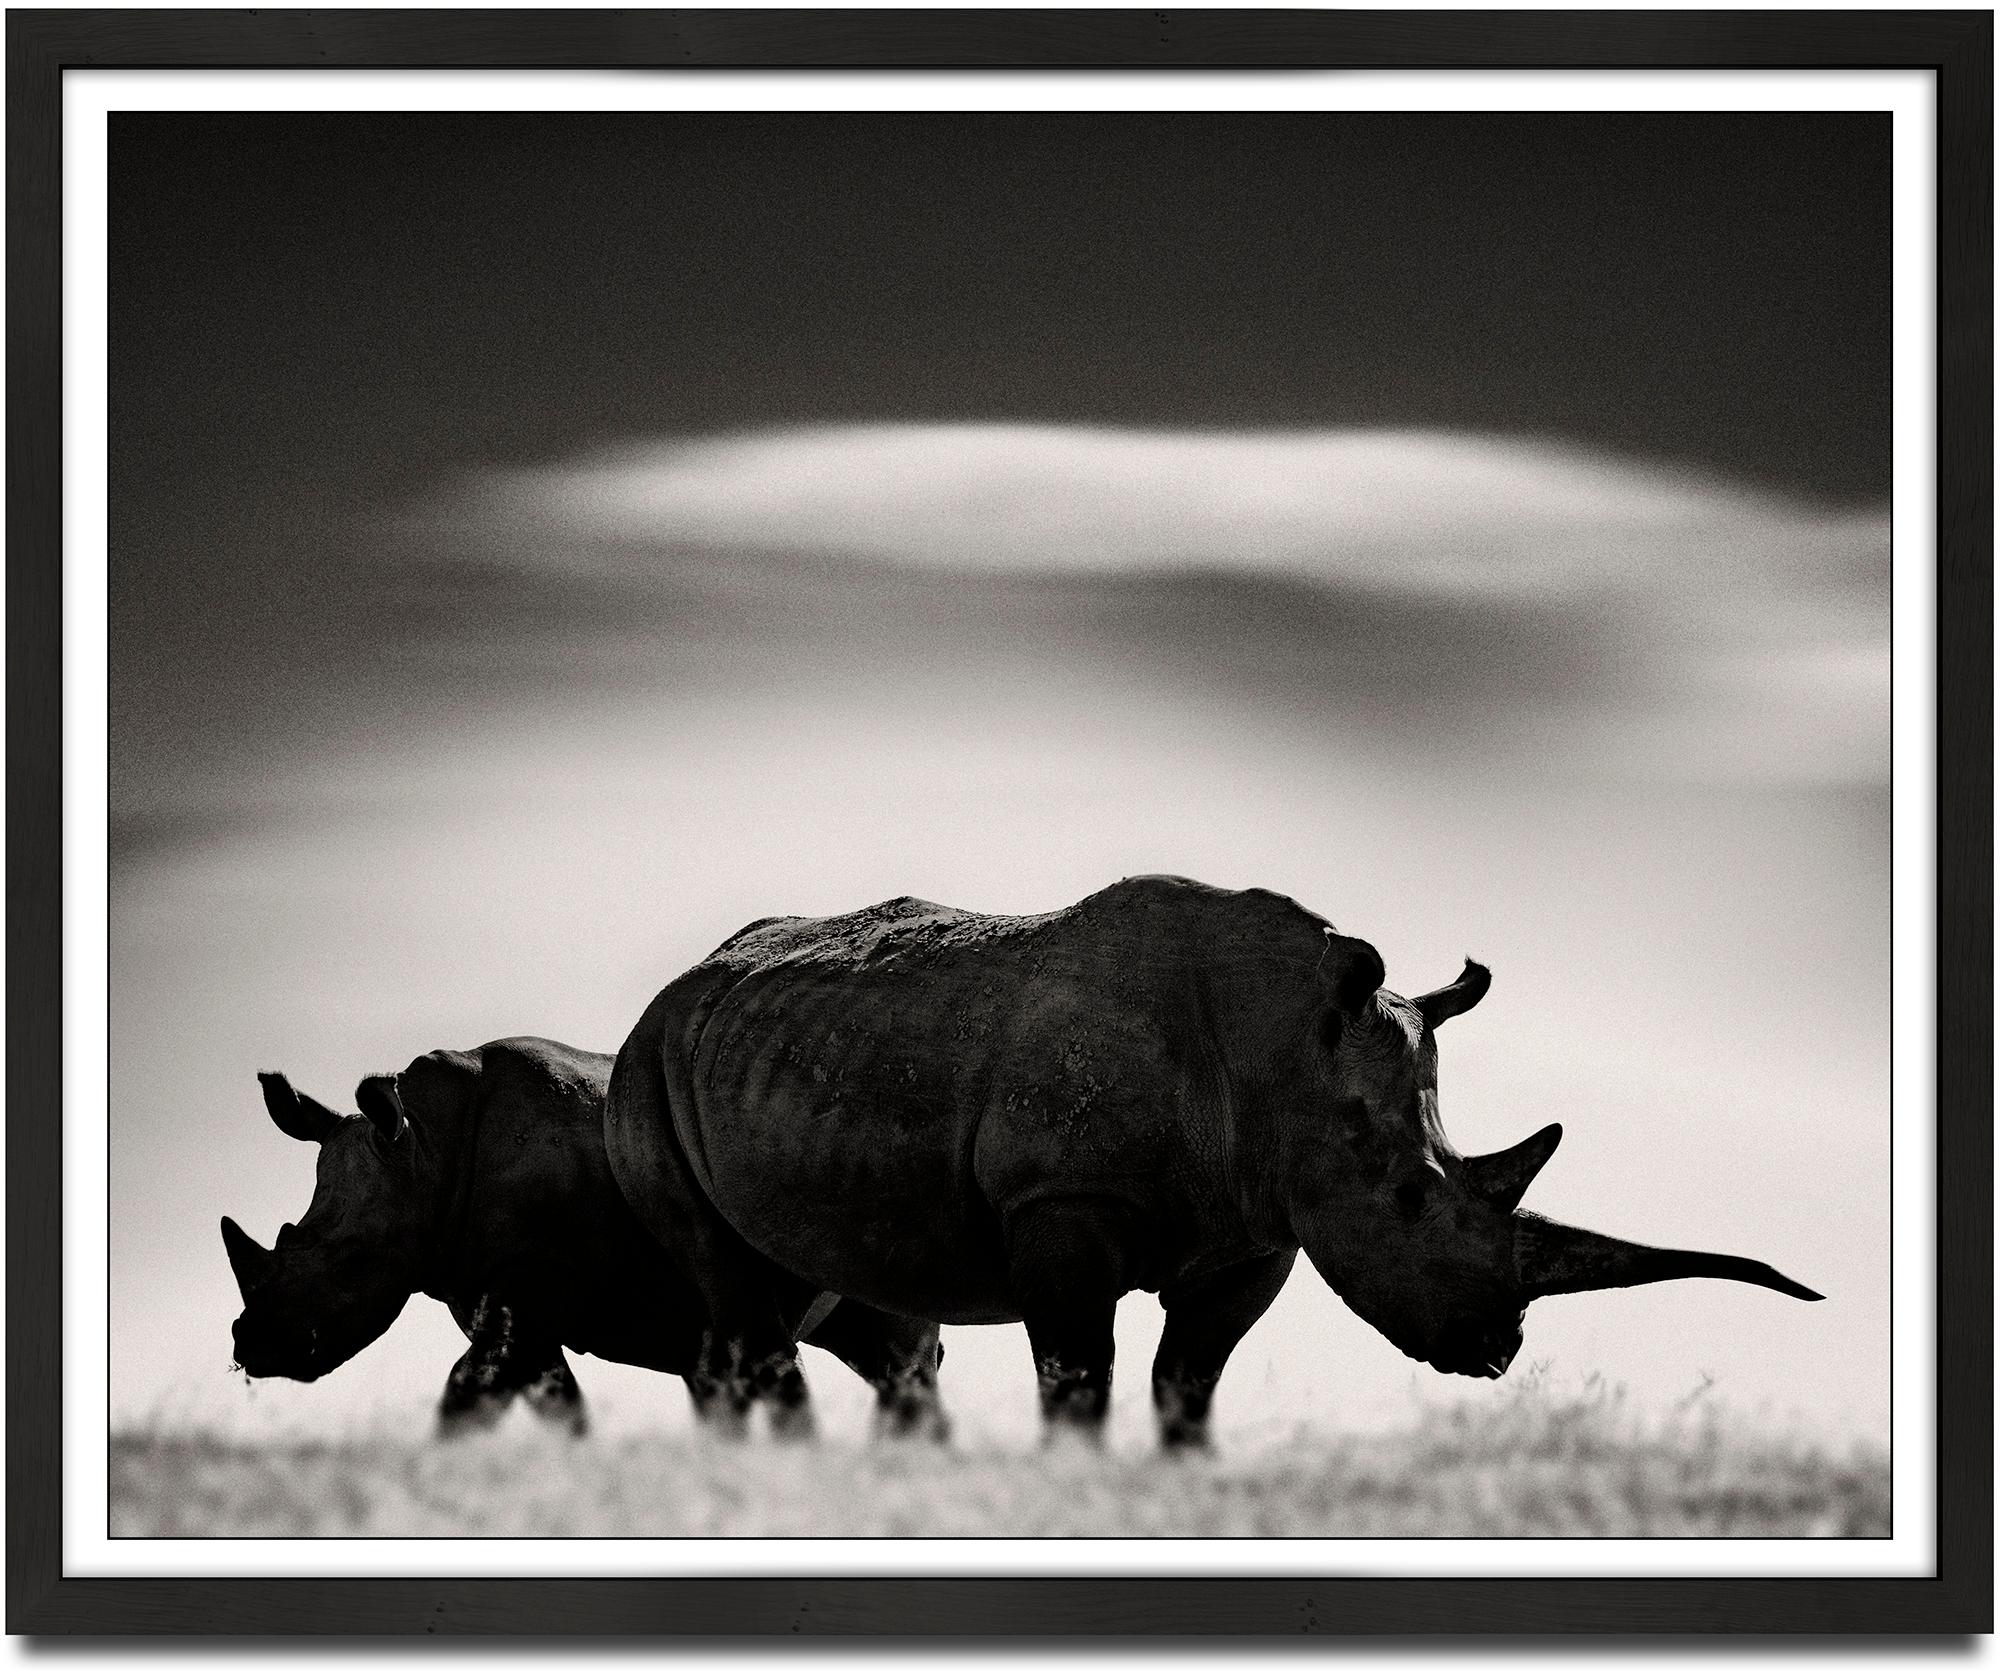 Rhino couple in front of Mount Kenya, animal, black and white photography - Photograph by Joachim Schmeisser